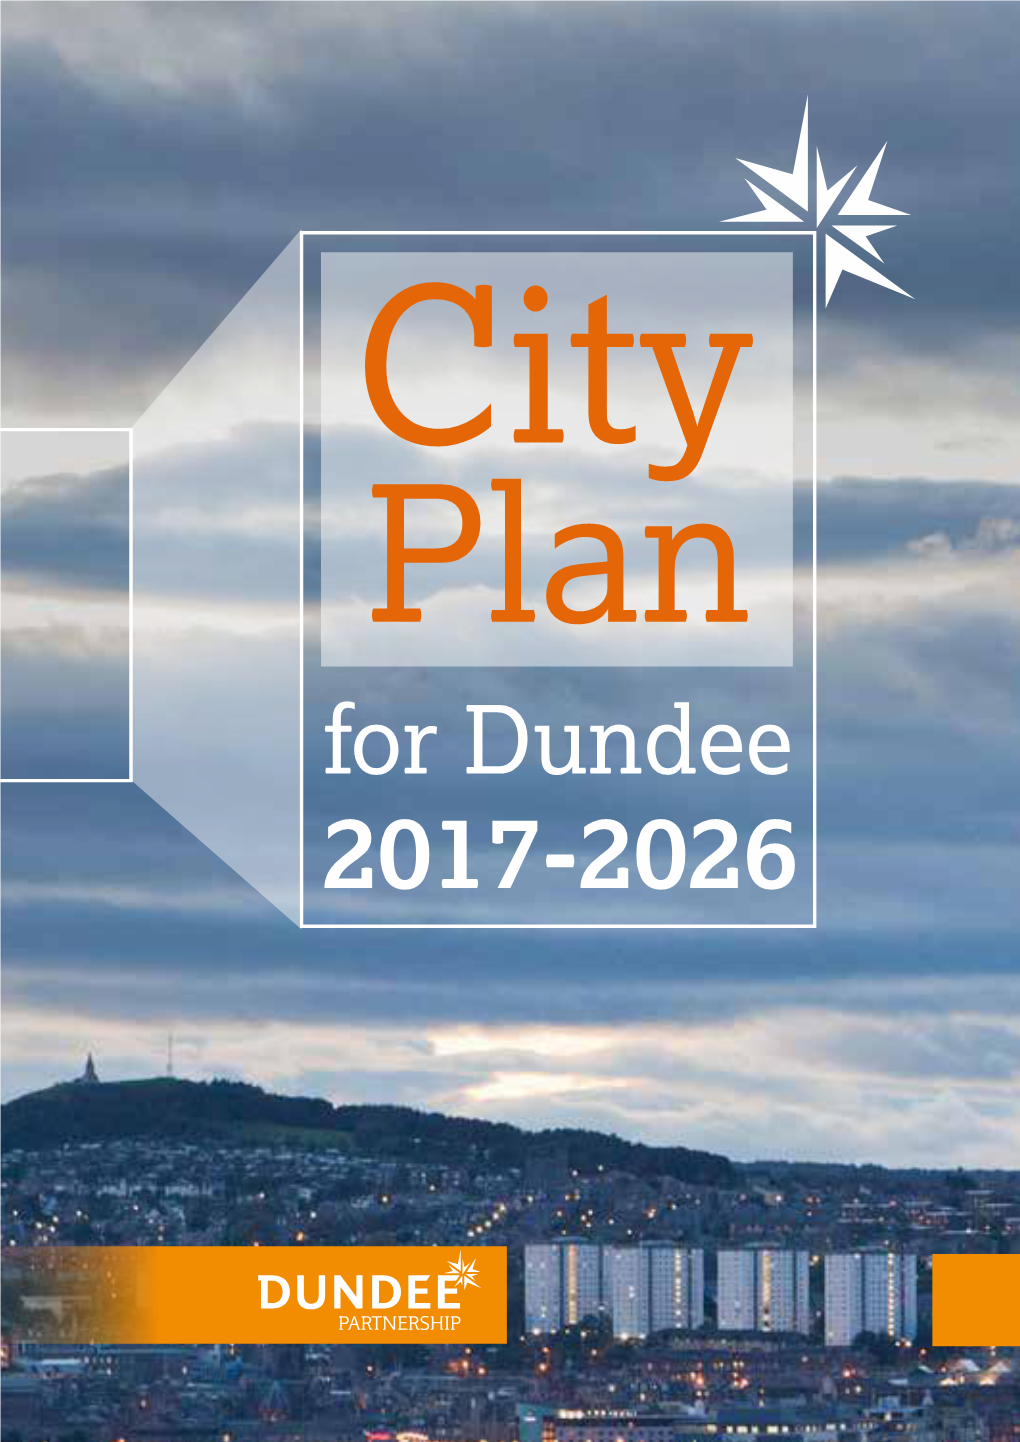 City Plan for Dundee 2017-2026